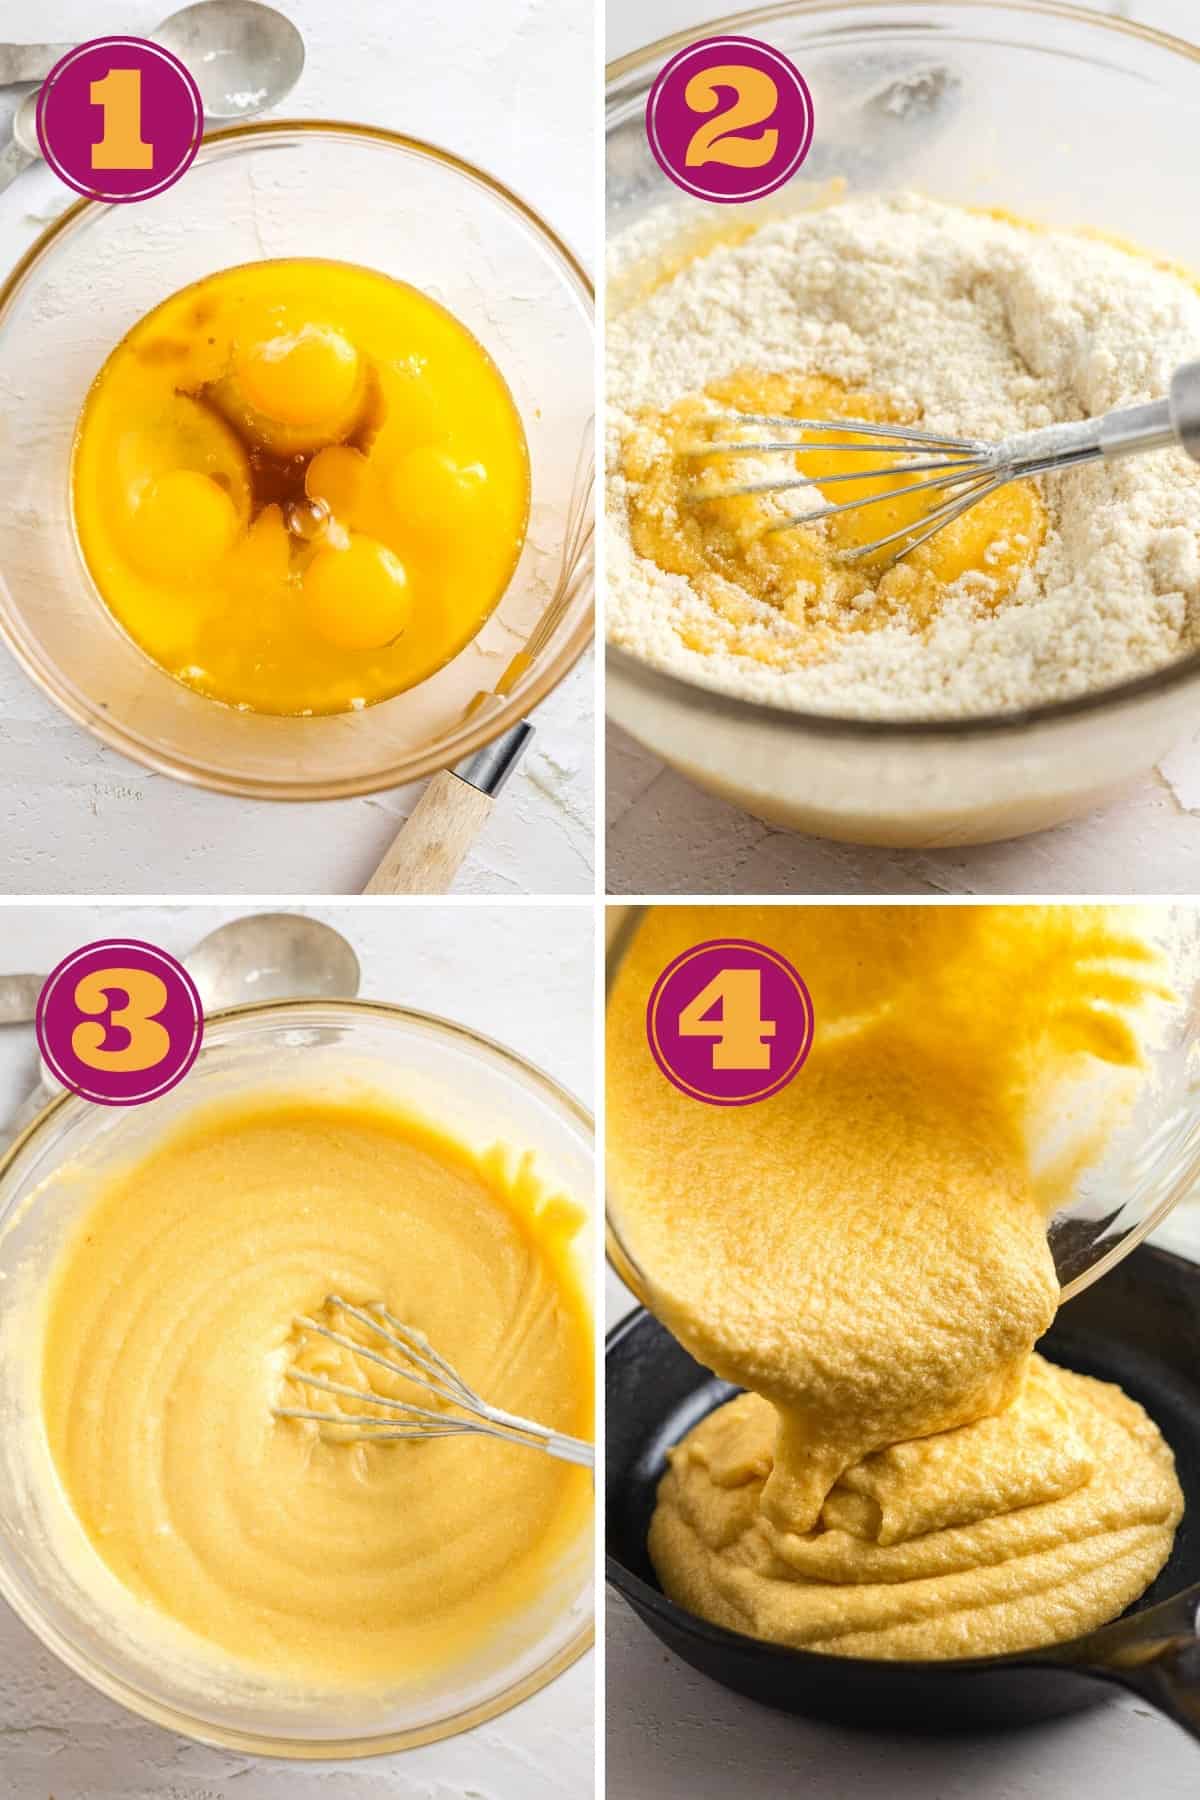 step-by-step instructions for how to make keto cornbread mix and then almond flour cornbread with simple ingredients